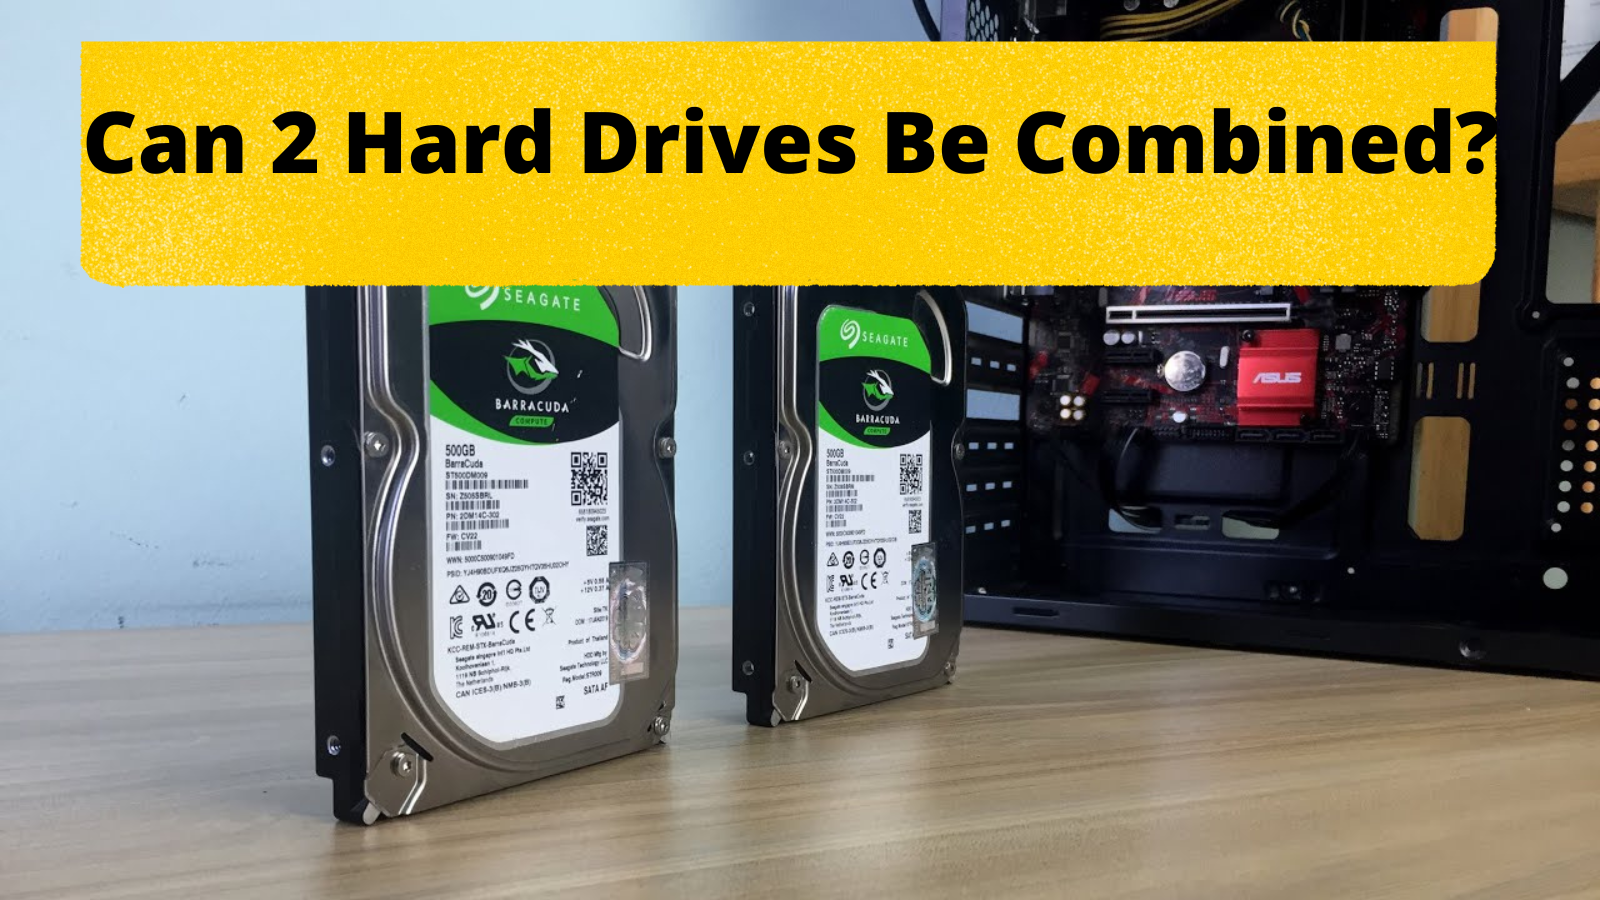 Can 2 Hard Drives Be Combined